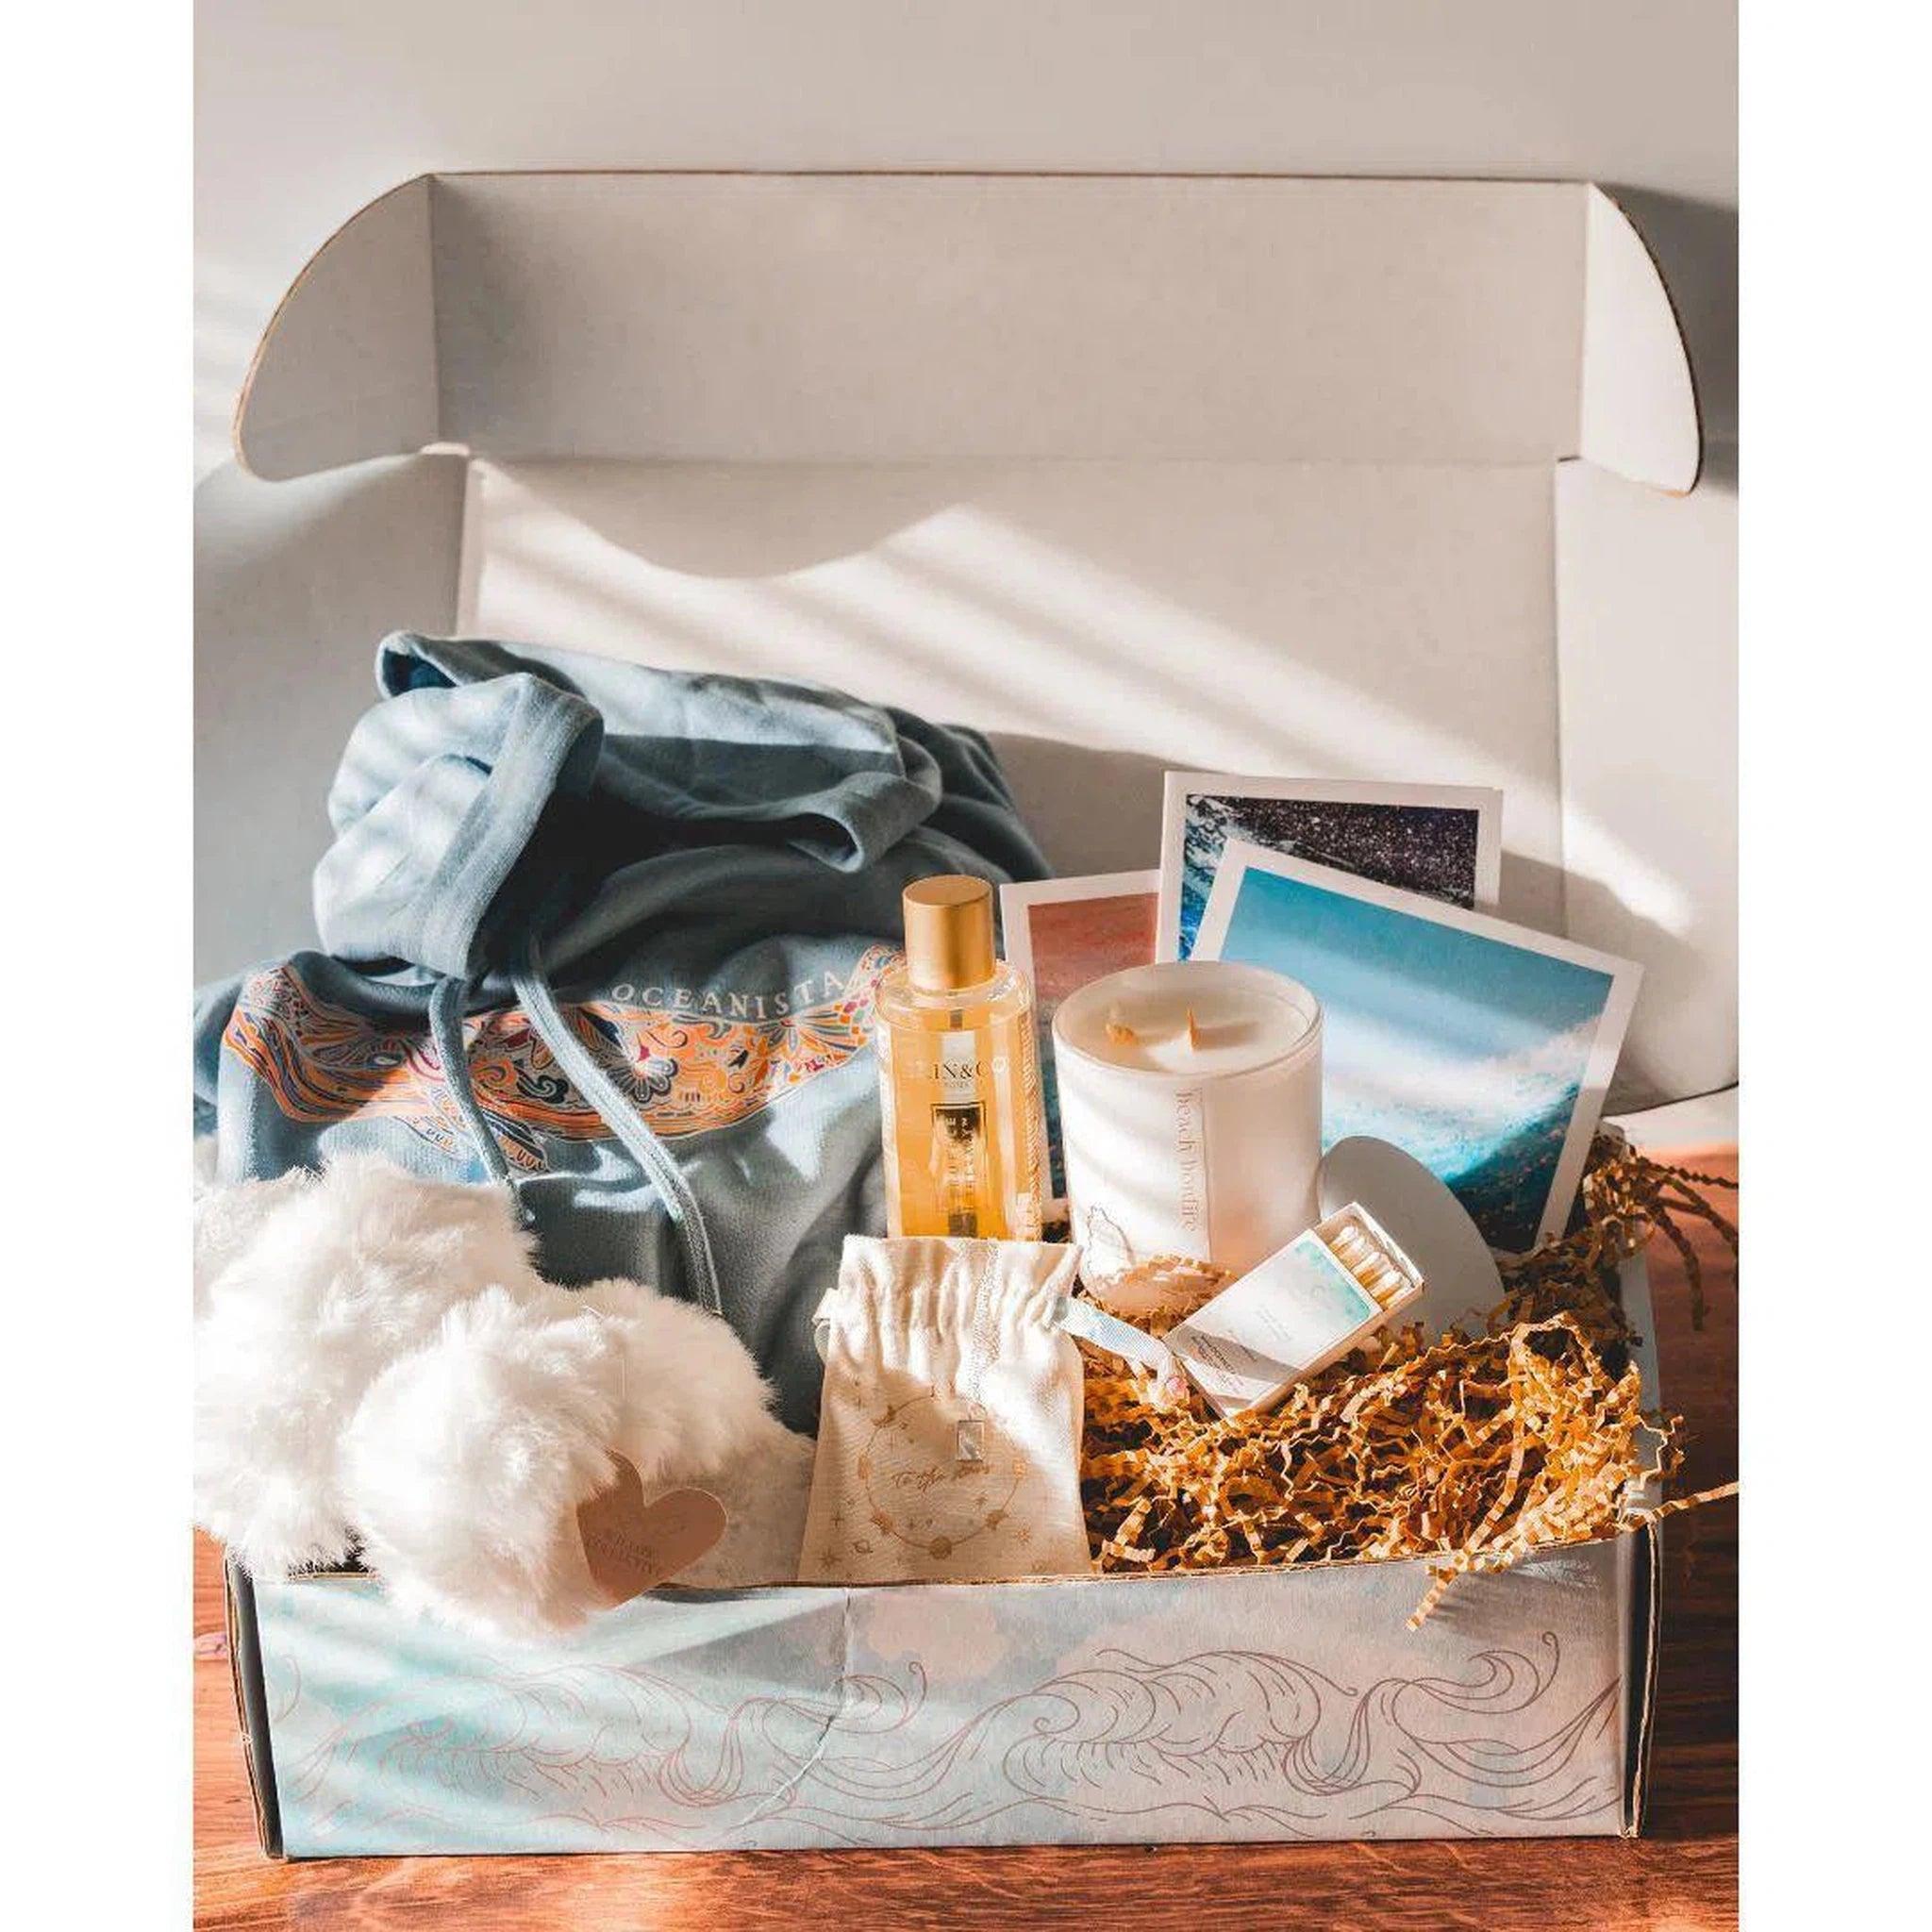 The Seahaven Box